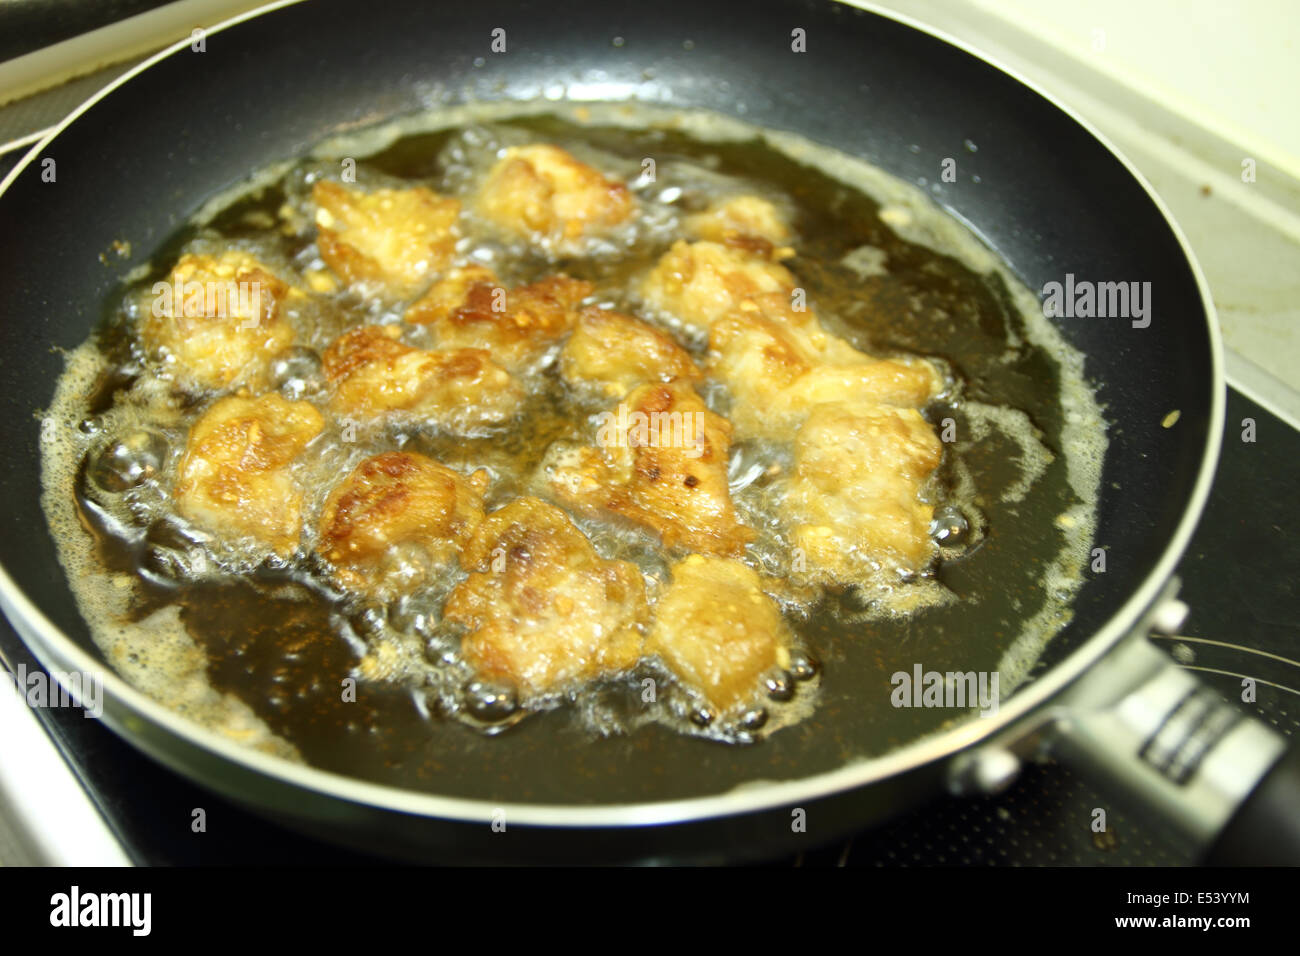 https://c8.alamy.com/comp/E53YYM/chicken-nuggets-in-hot-cooking-oil-on-a-pan-E53YYM.jpg